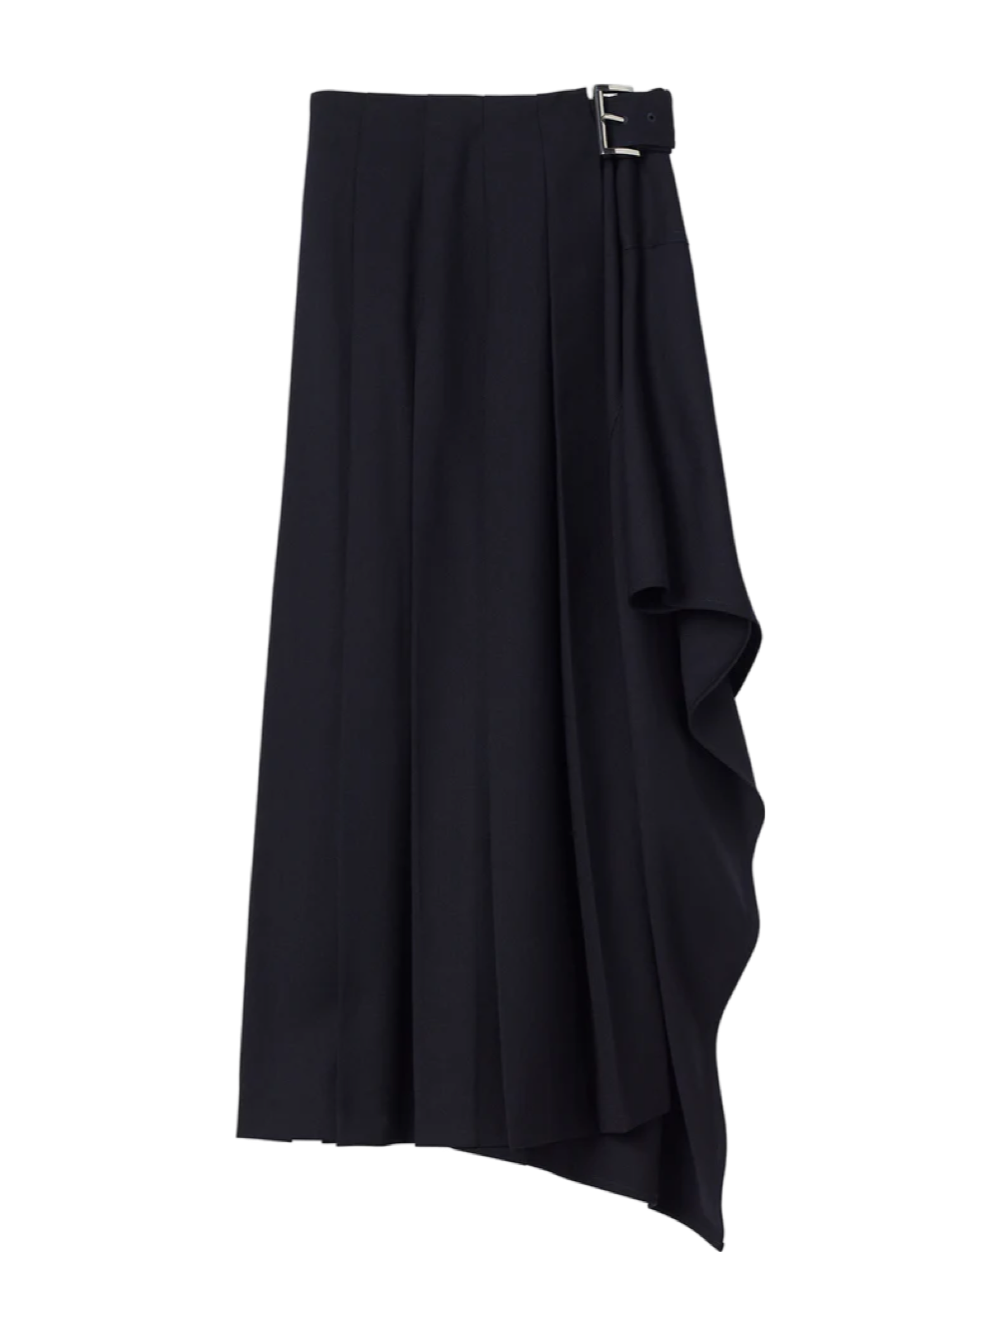 A.L.C. Wayland Skirt in Navy